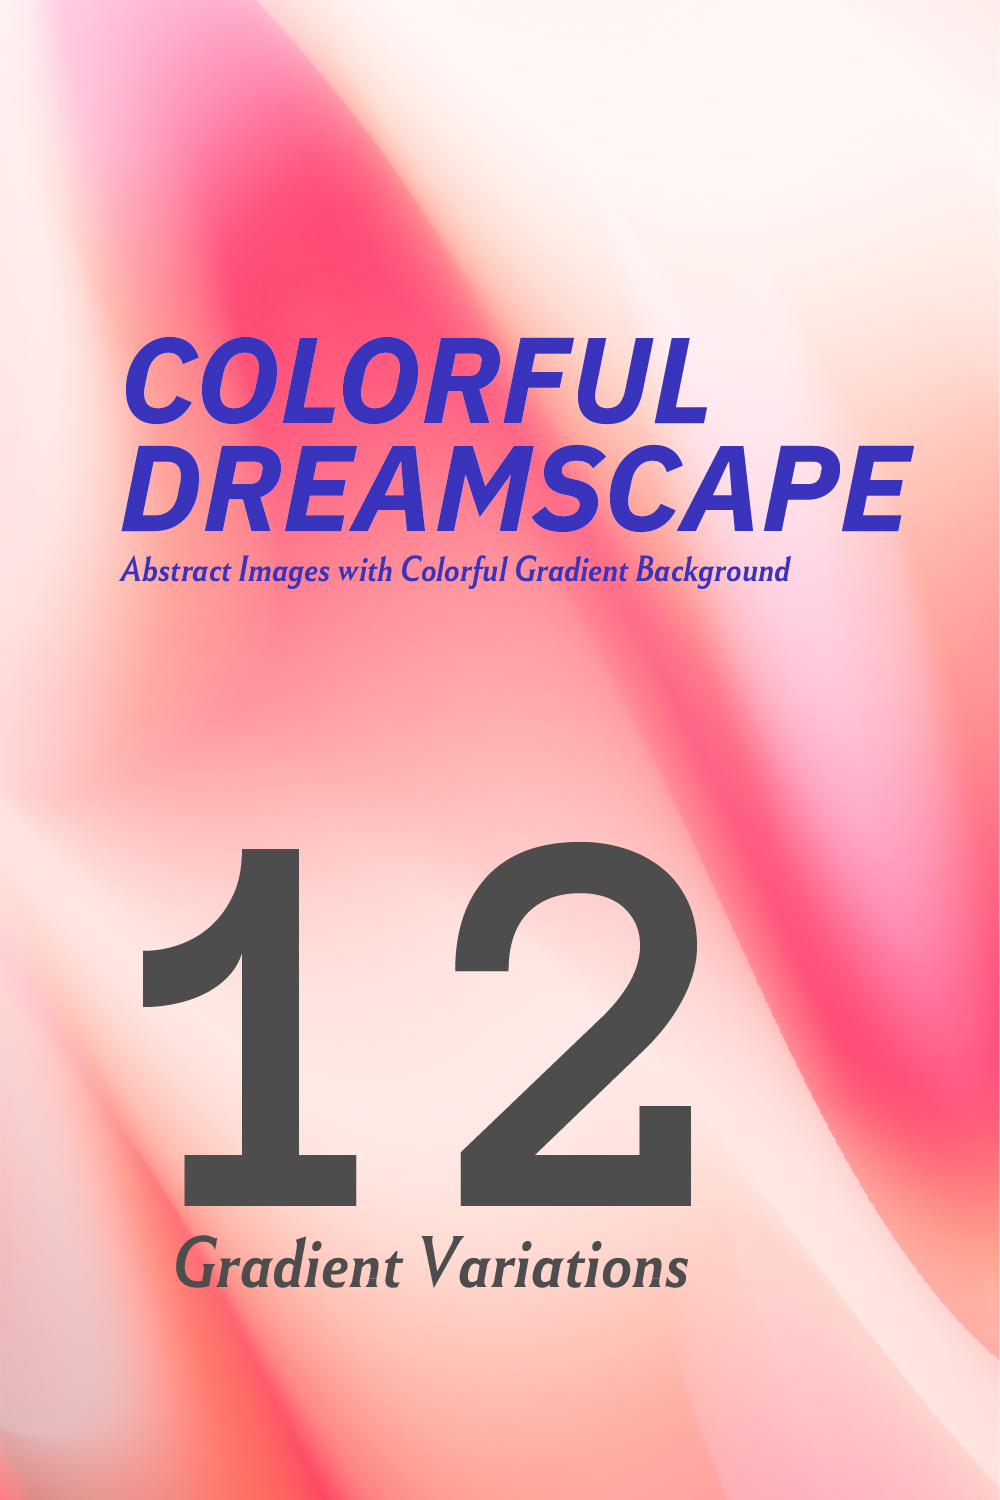 Colorful Dreamscape - abstract images with colorful gradient backgrounds pinterest preview image.